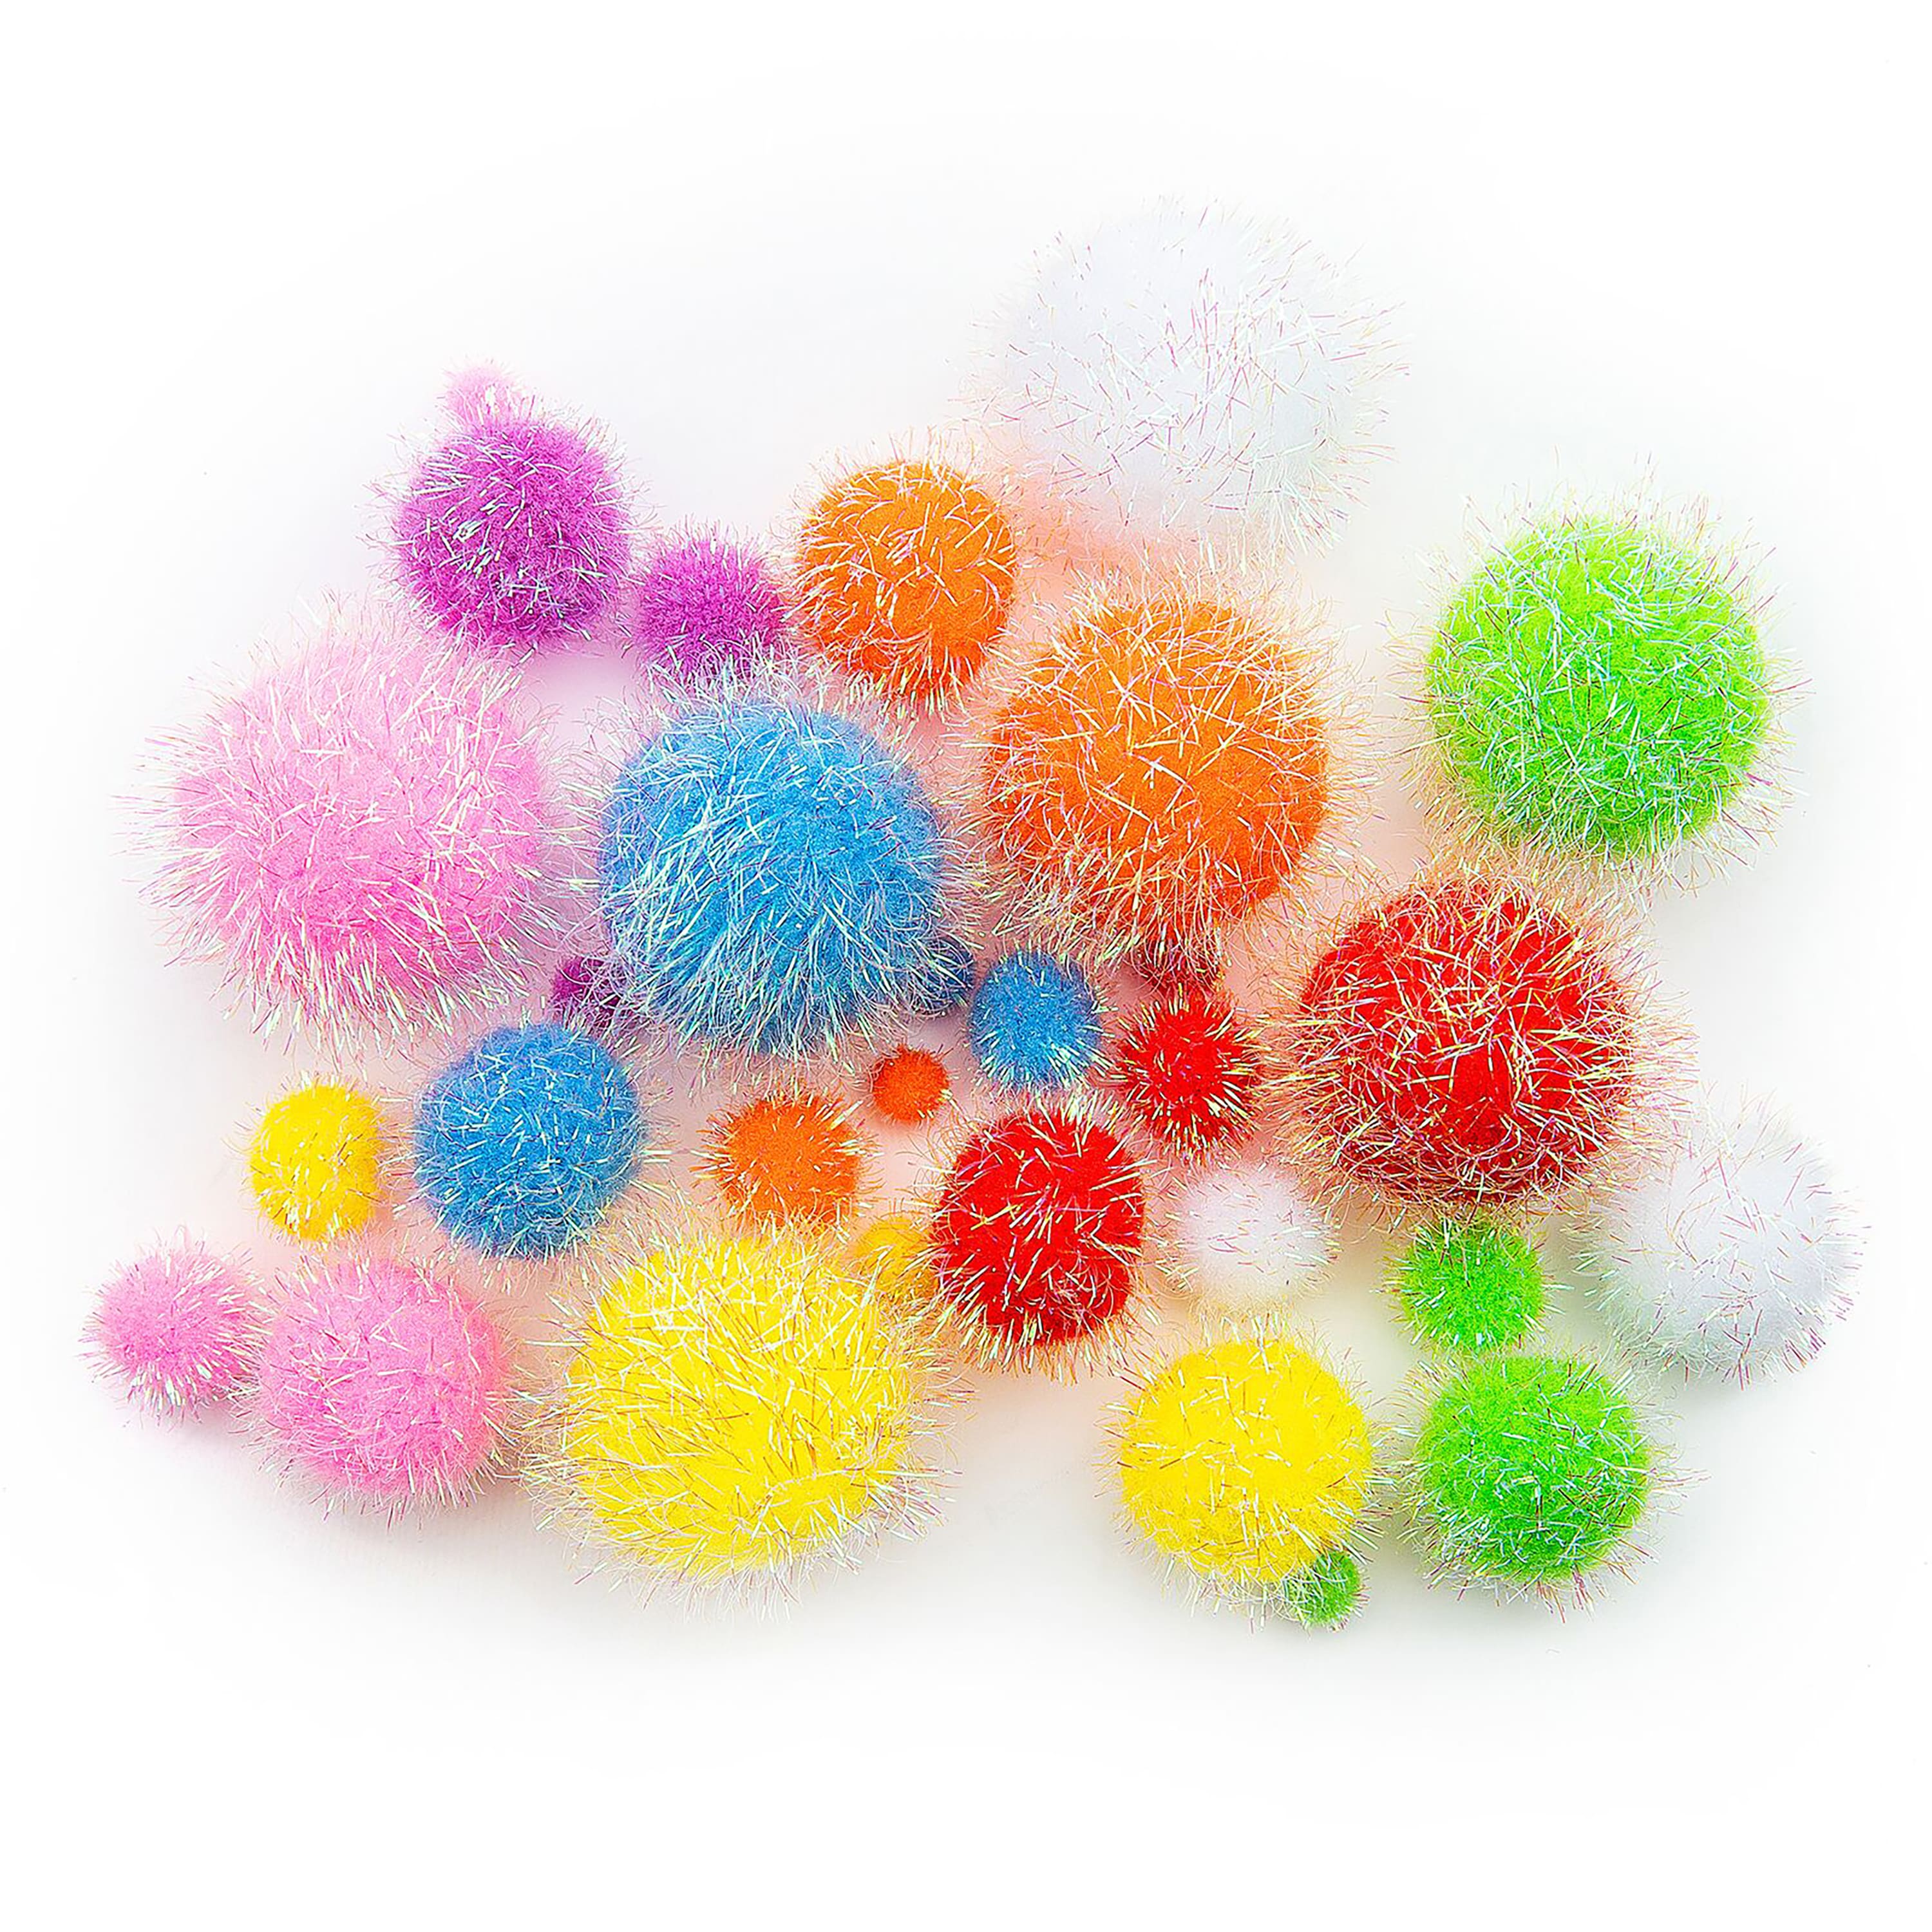 Bright Sparkle Mix Pom by Creatology™ | Michaels